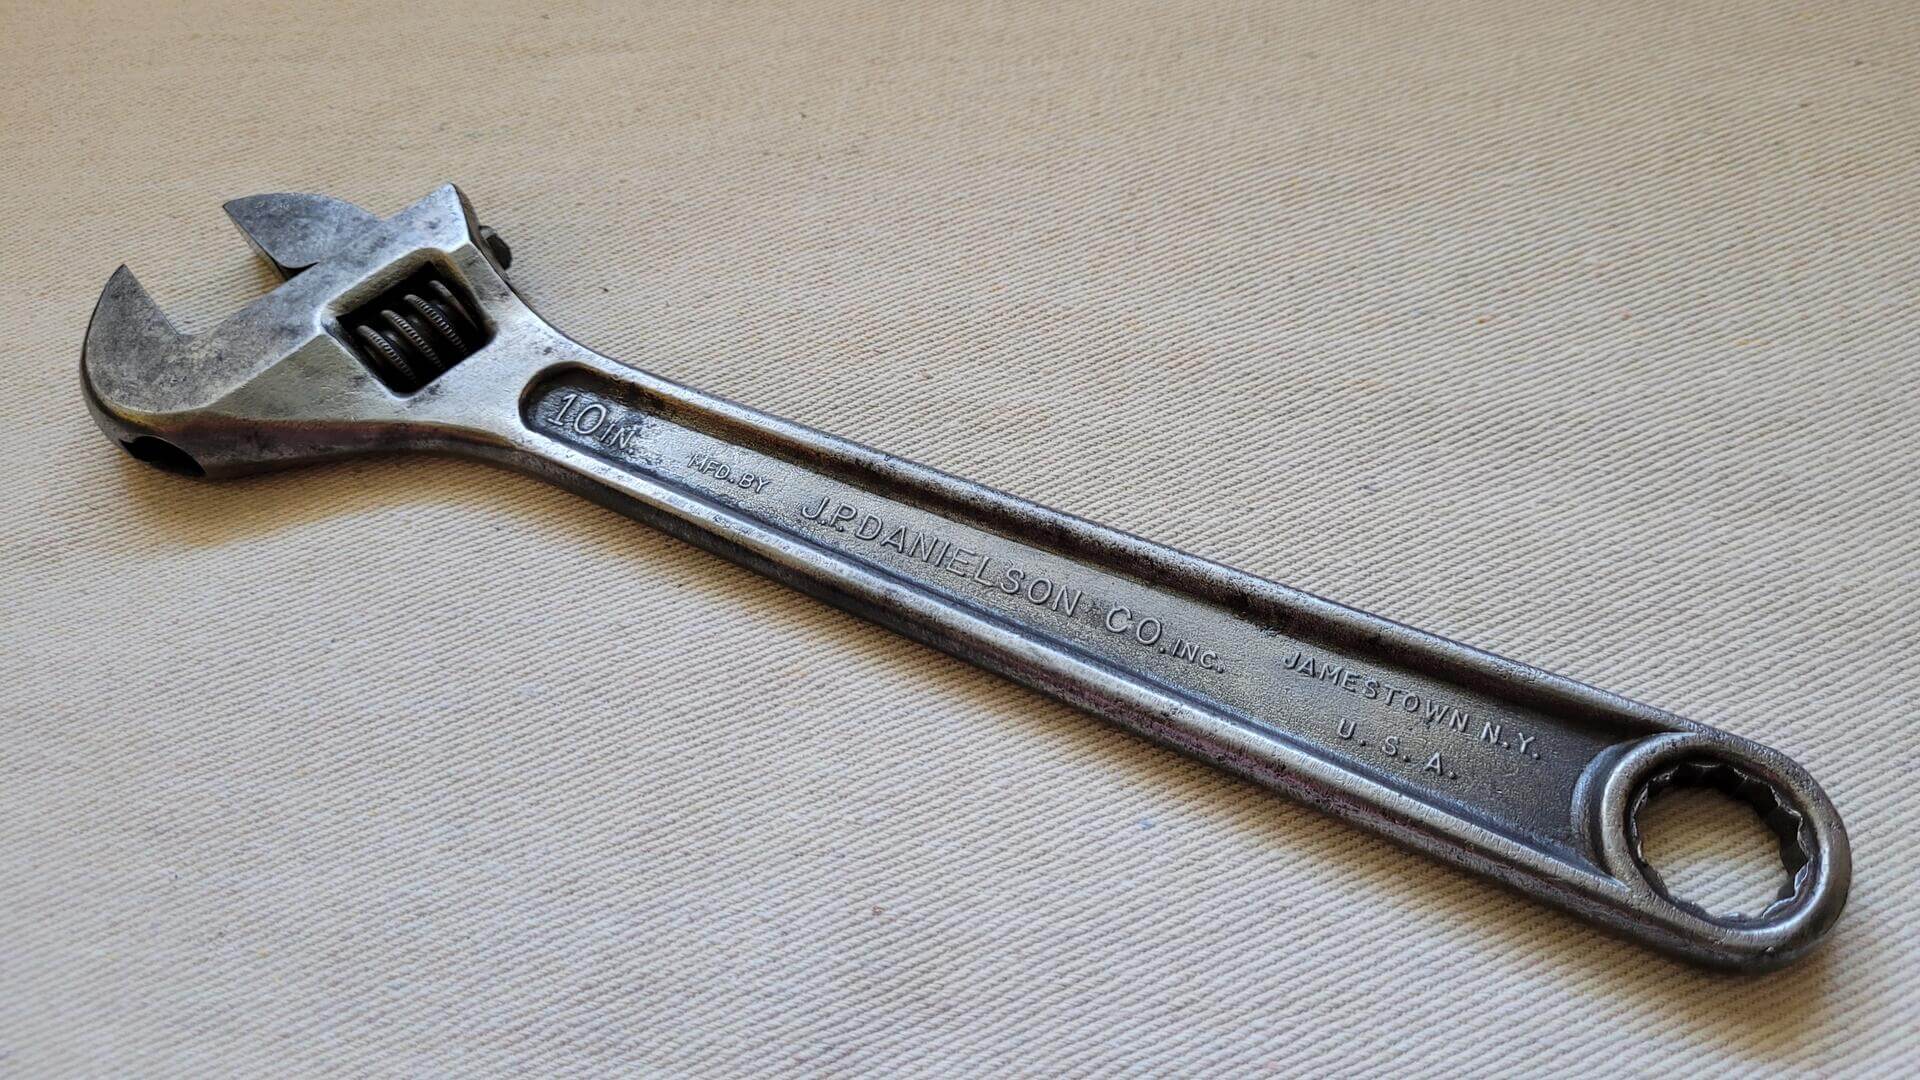 vintage-jp-danielson-co-betr-grip-10-inch-adjustable-wrench-jamestown-ny-made-in-usa-antique-collectible-forged-steel-hand-tool